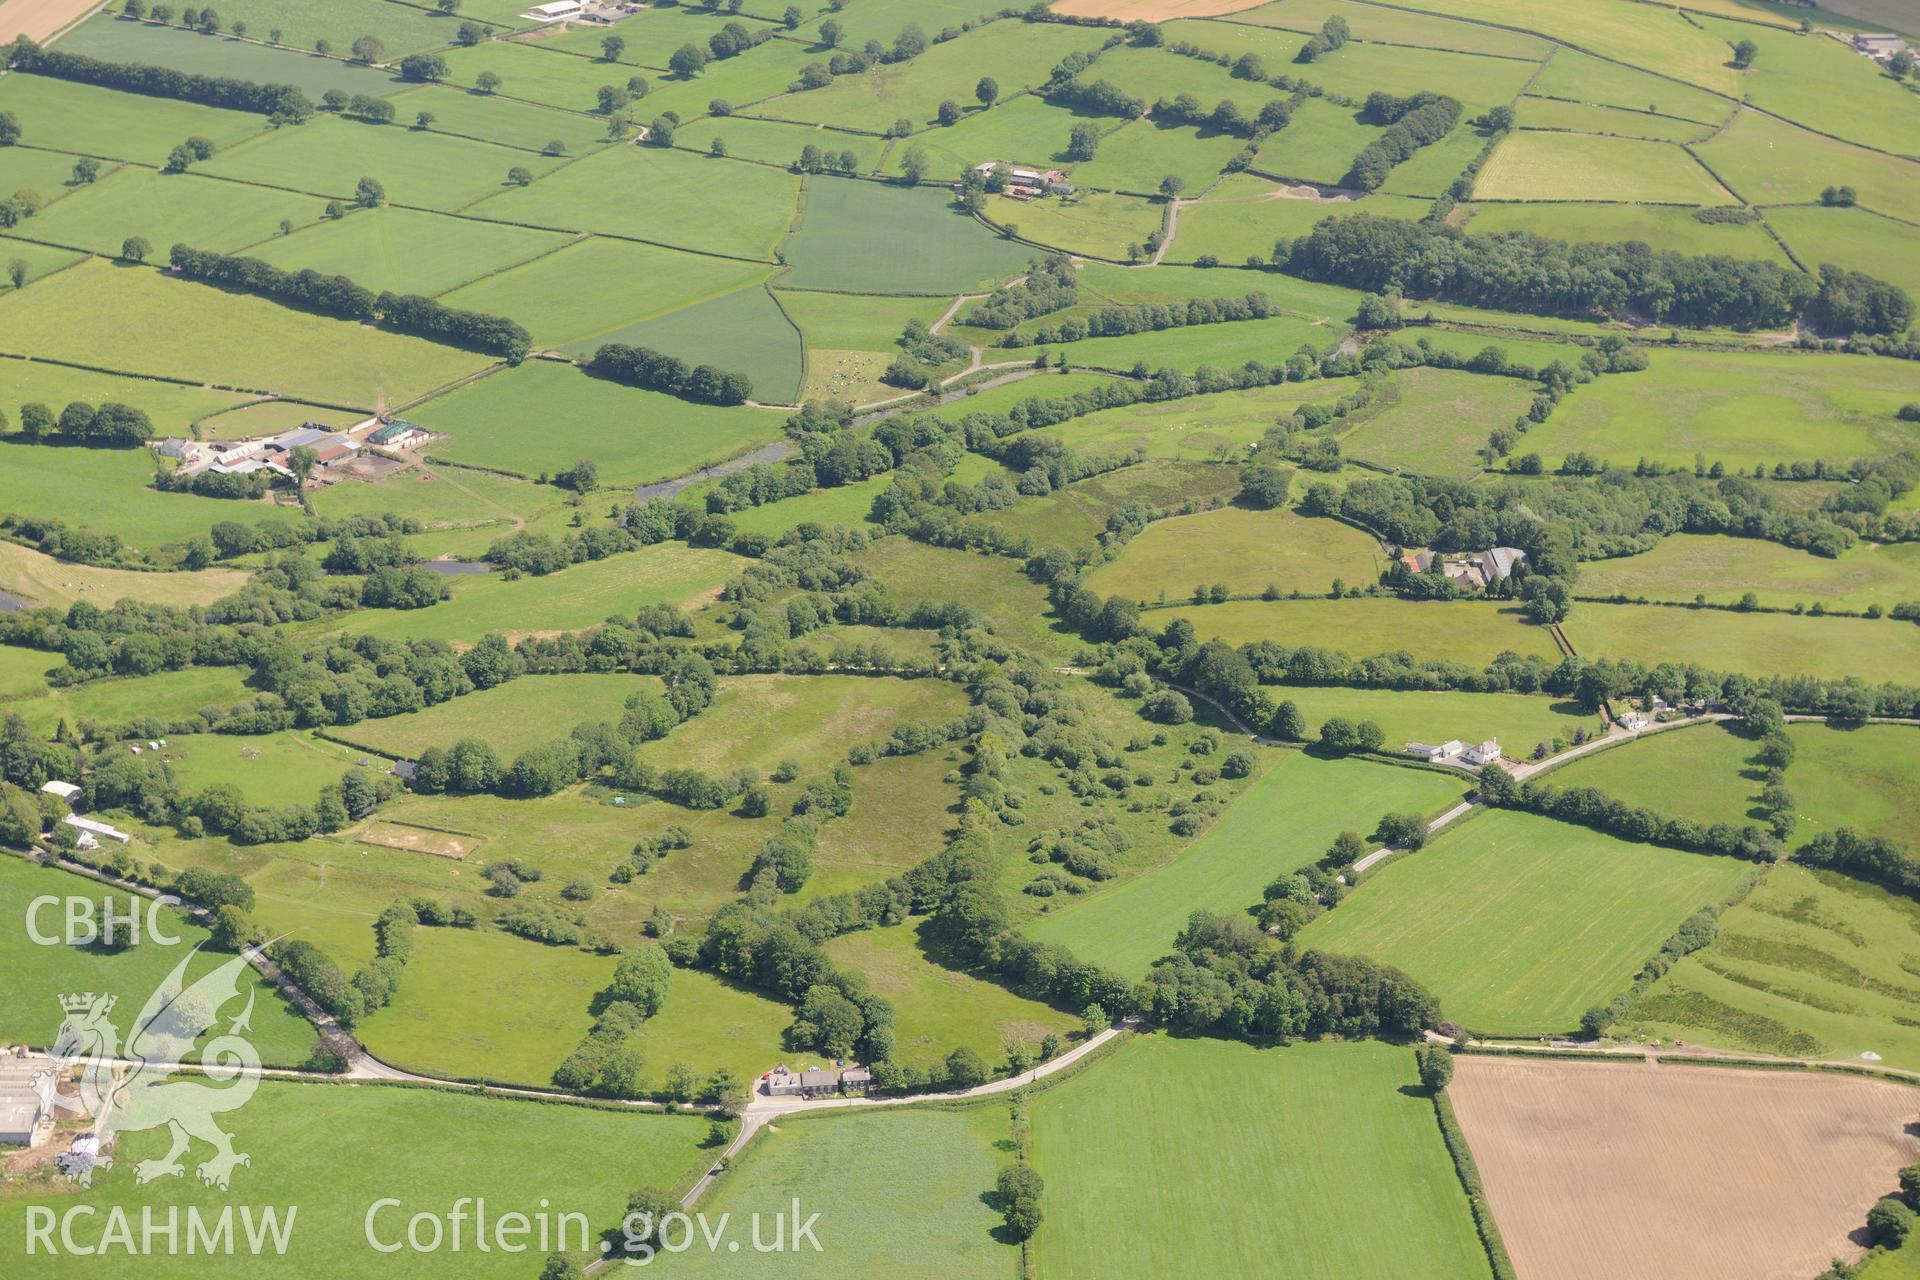 Bremia or Llanio Roman fort and settlement and the possible location of a Roman shrine where a Roman wooden head was discovered in the nineteenth century, north east of Llanddewi Brefi. Oblique aerial photograph taken during the Royal Commission's programme of archaeological aerial reconnaissance by Toby Driver on 30th June 2015.